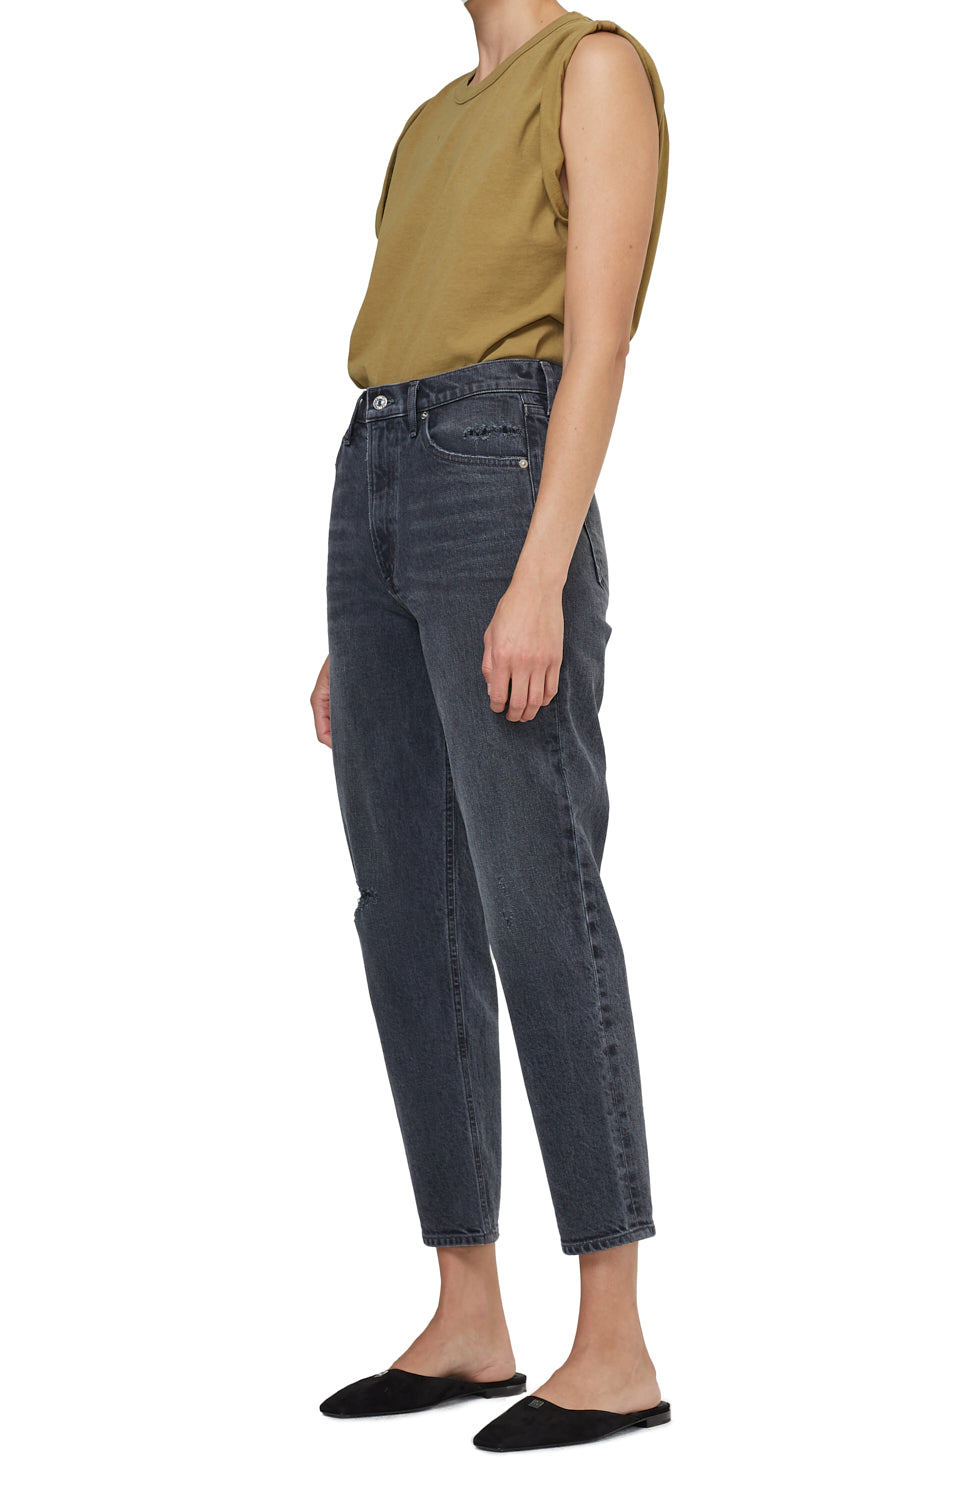 Citizens of Humanity - Marlee Relaxed Straight Leg Jeans in The Cliffs